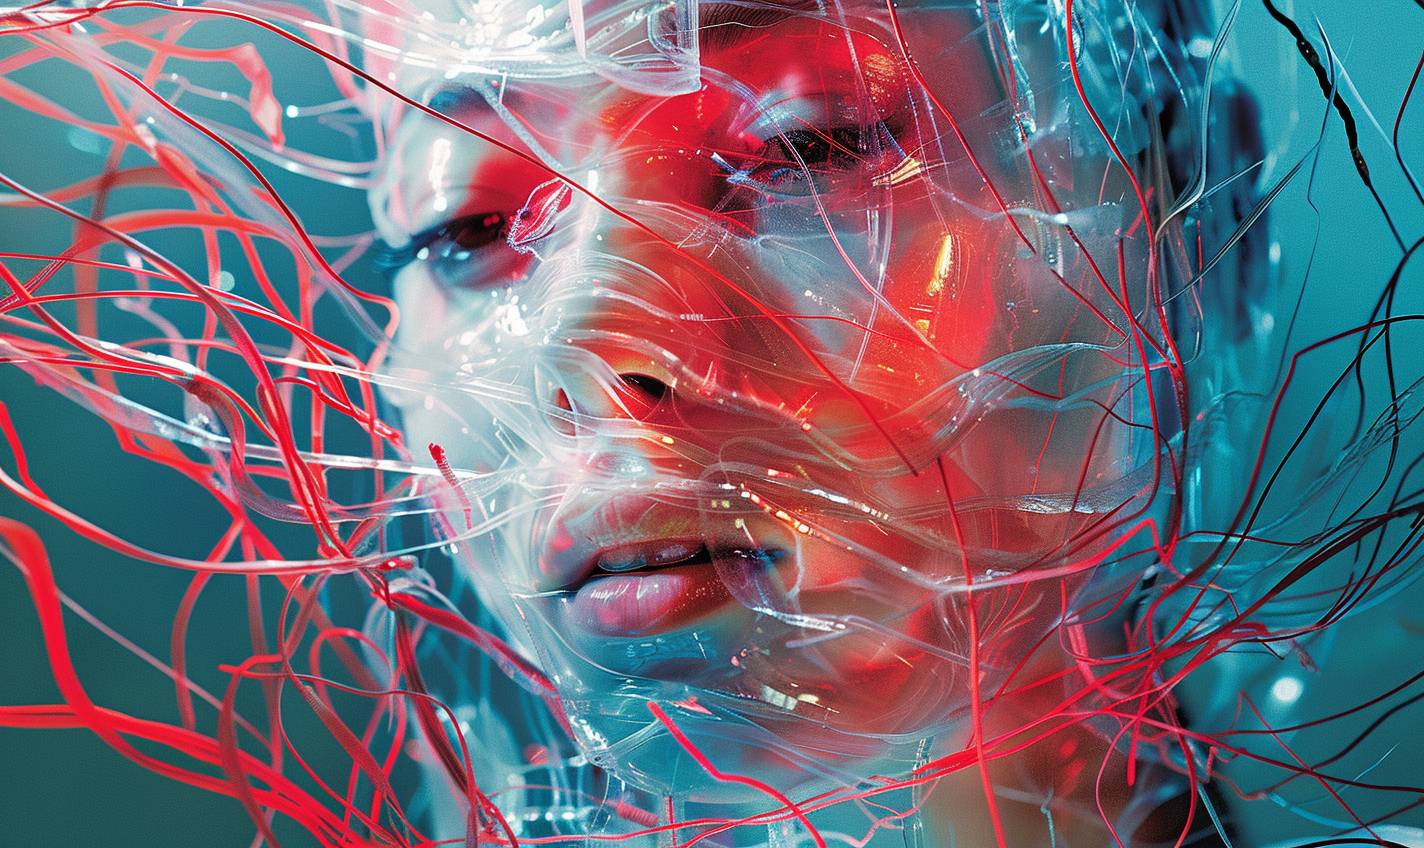 Tim Walker's haute-couture frontal portrait of a clear white ethereal android with translucent skin drowning in a sea of wires. Red and cyan hues, glowing highlights, dark shadows.